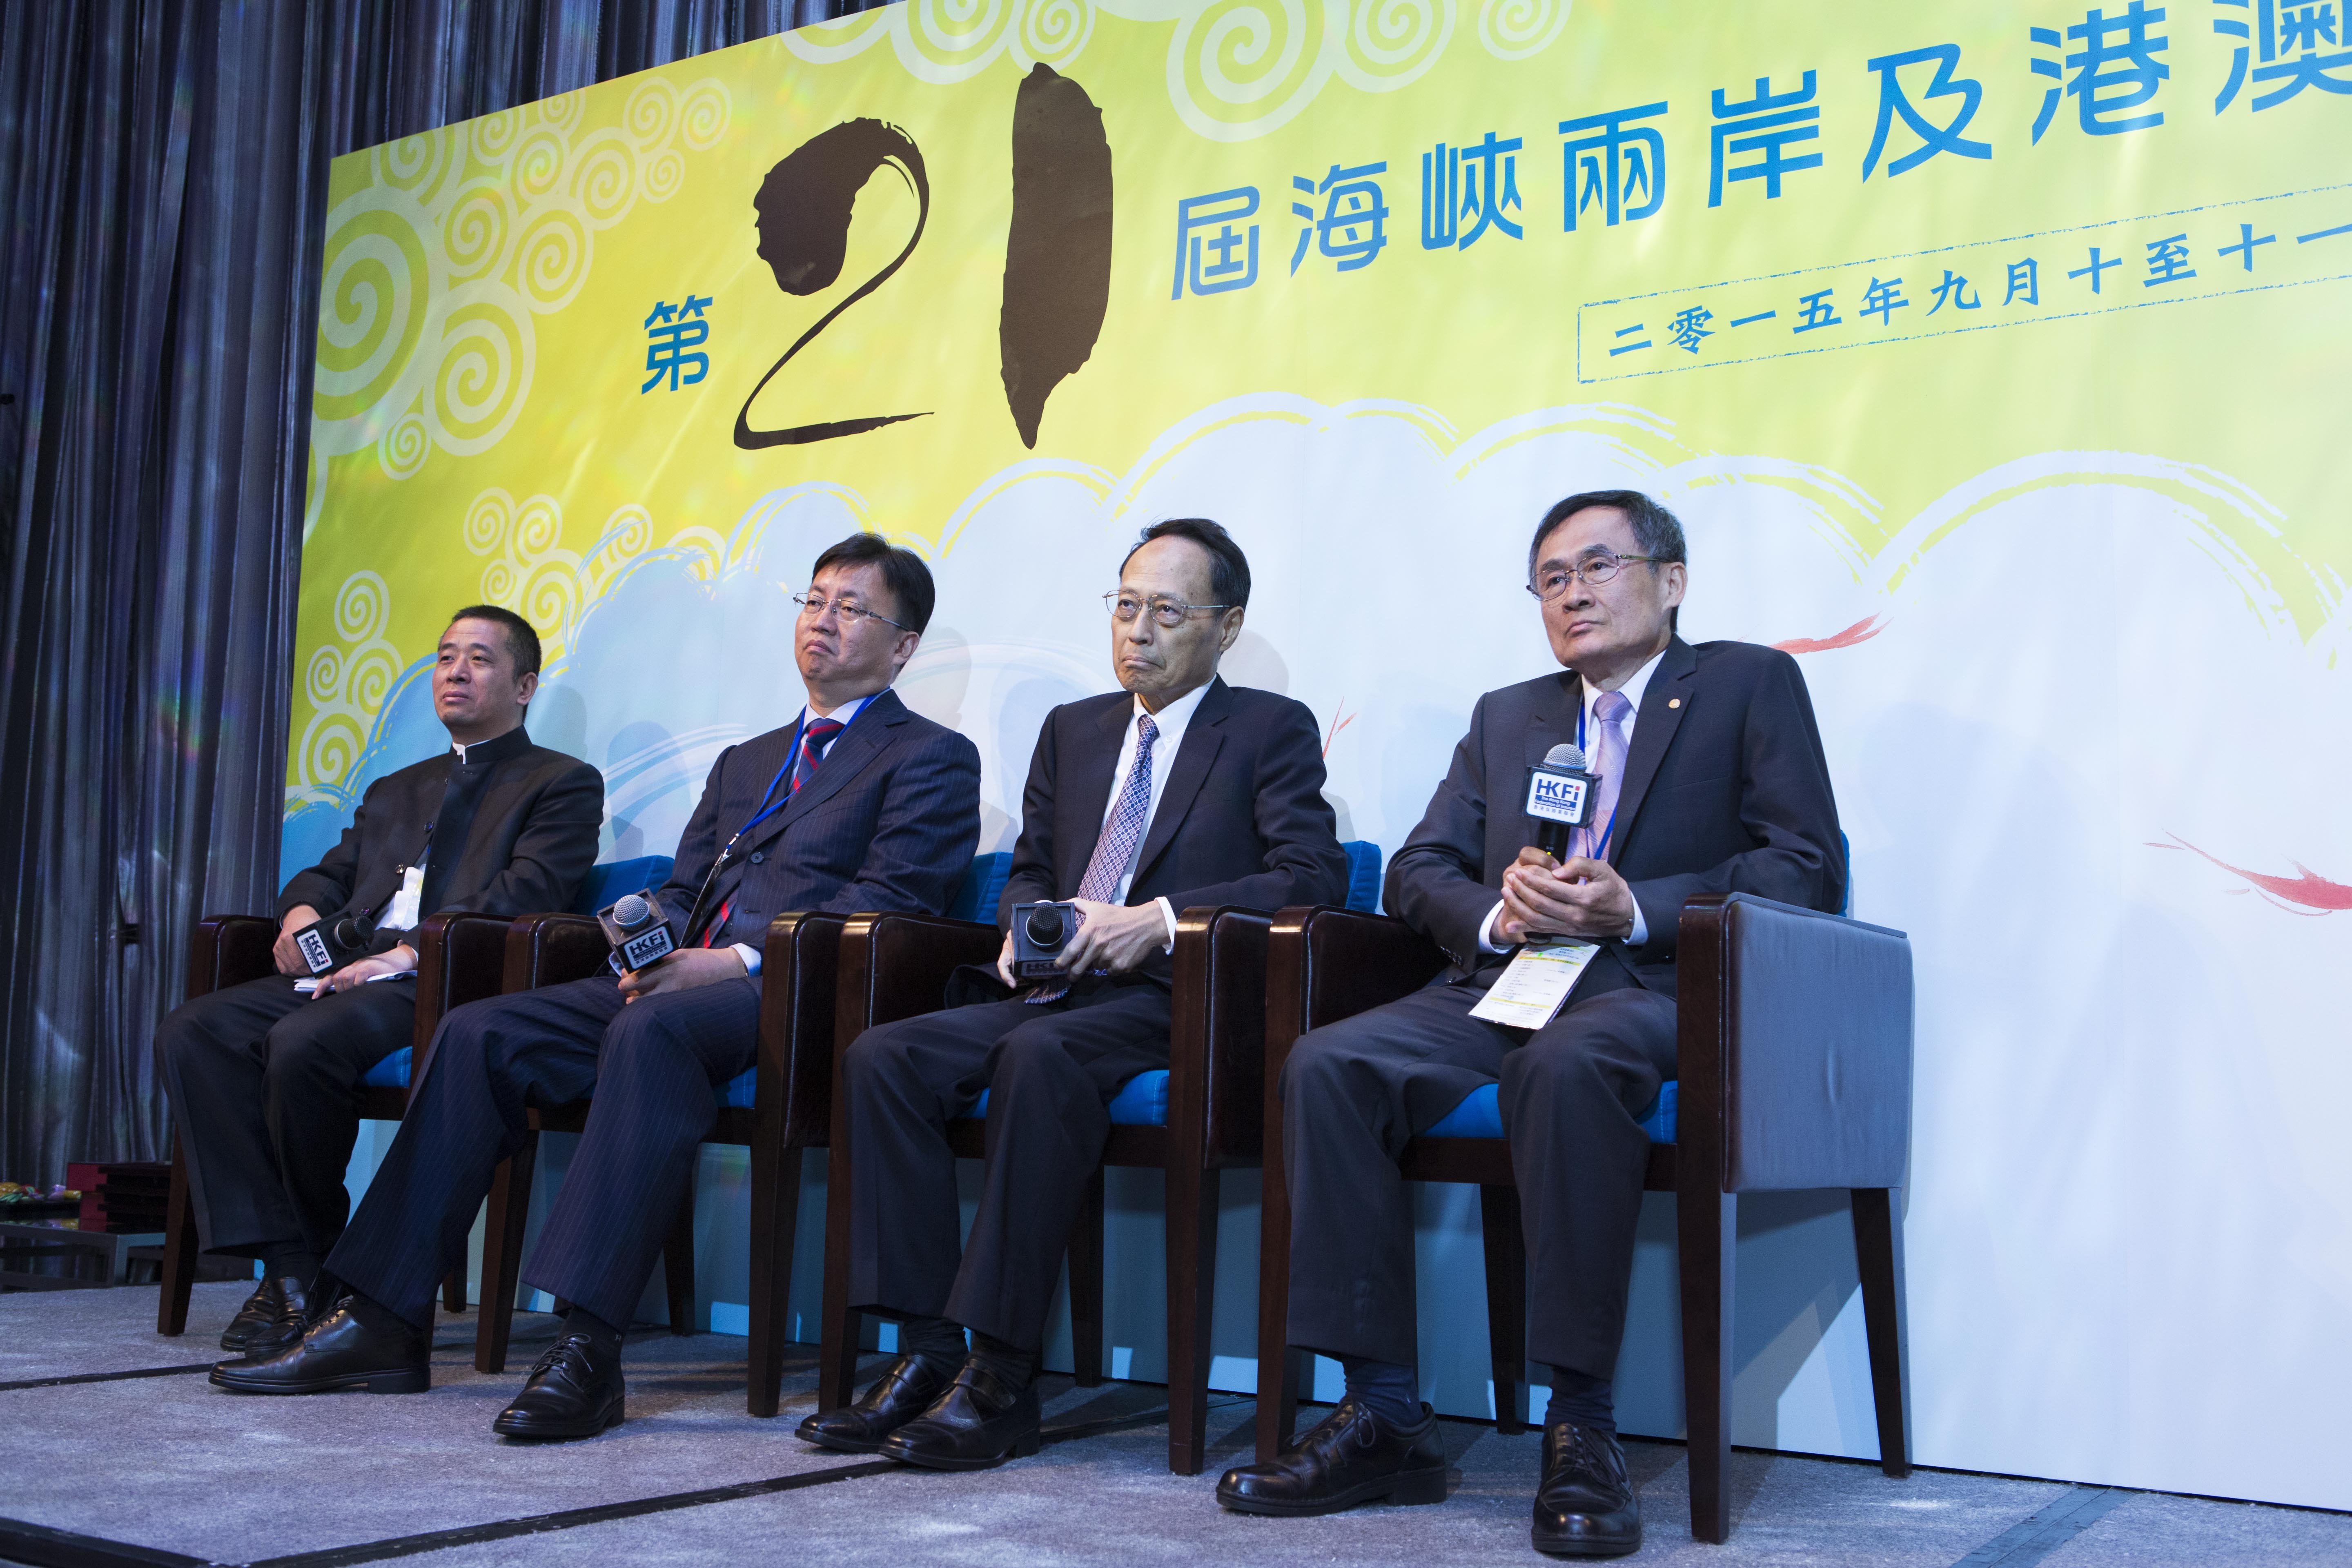 21st Cross Strait, Hong Kong & Macau Insurance Business Conference Opening Ceremony cum Plenary Session